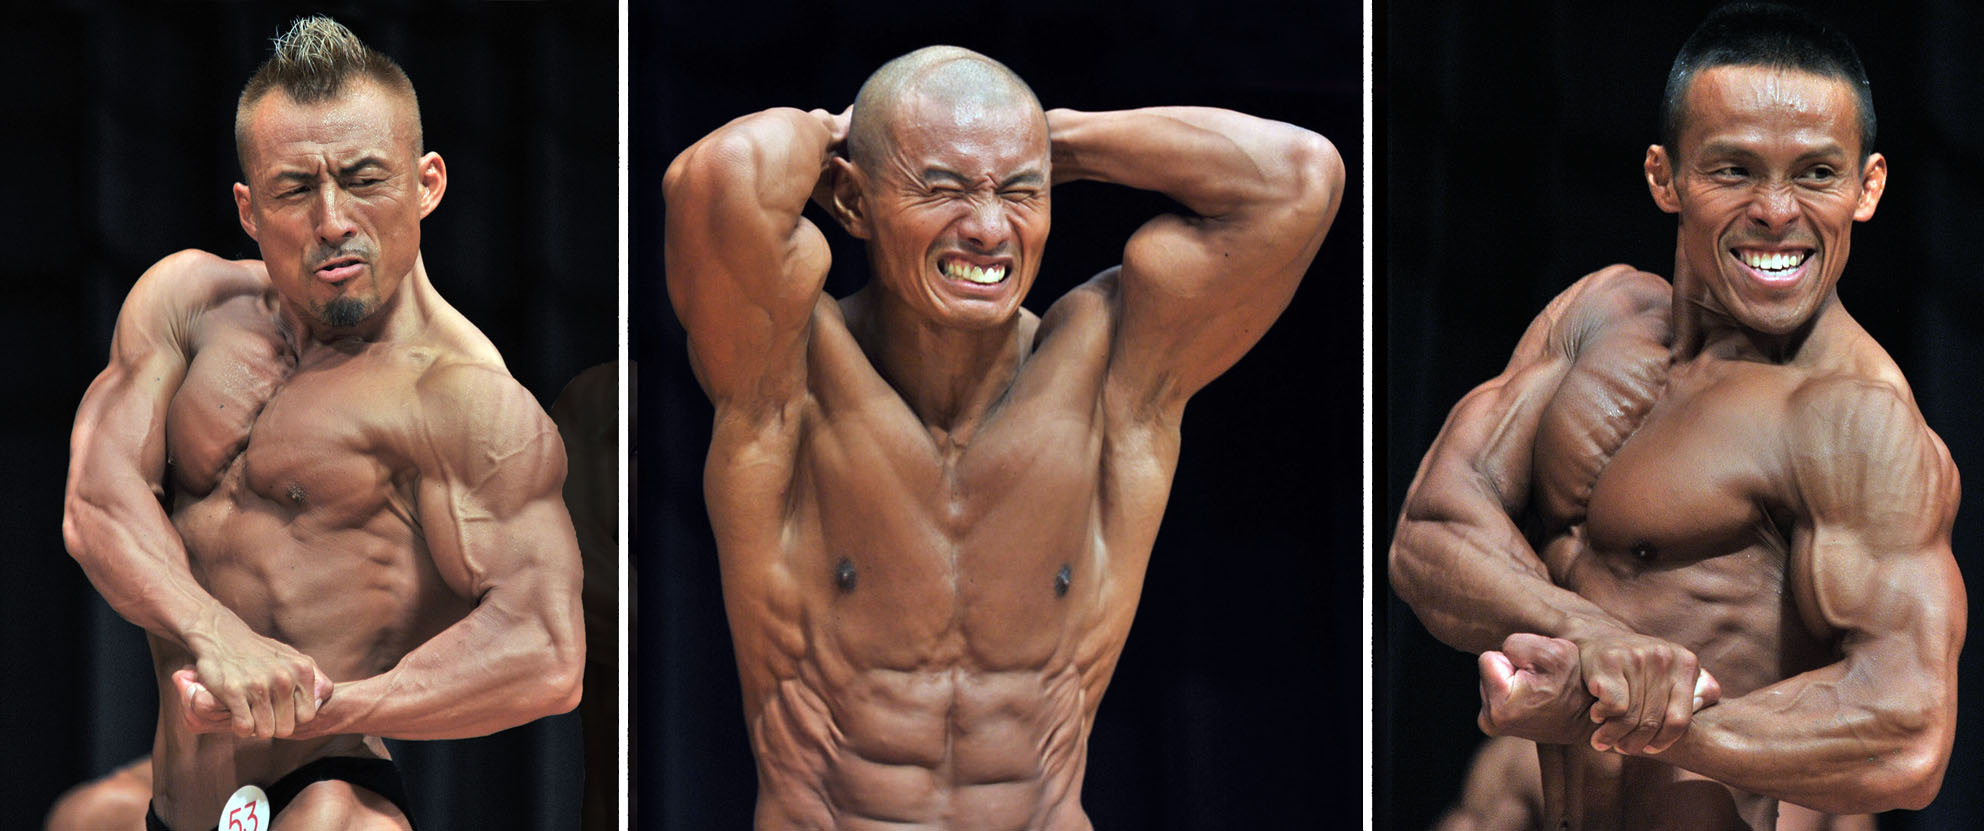 Your First Bodybuilding Competition! Are You Ready For The Stage?